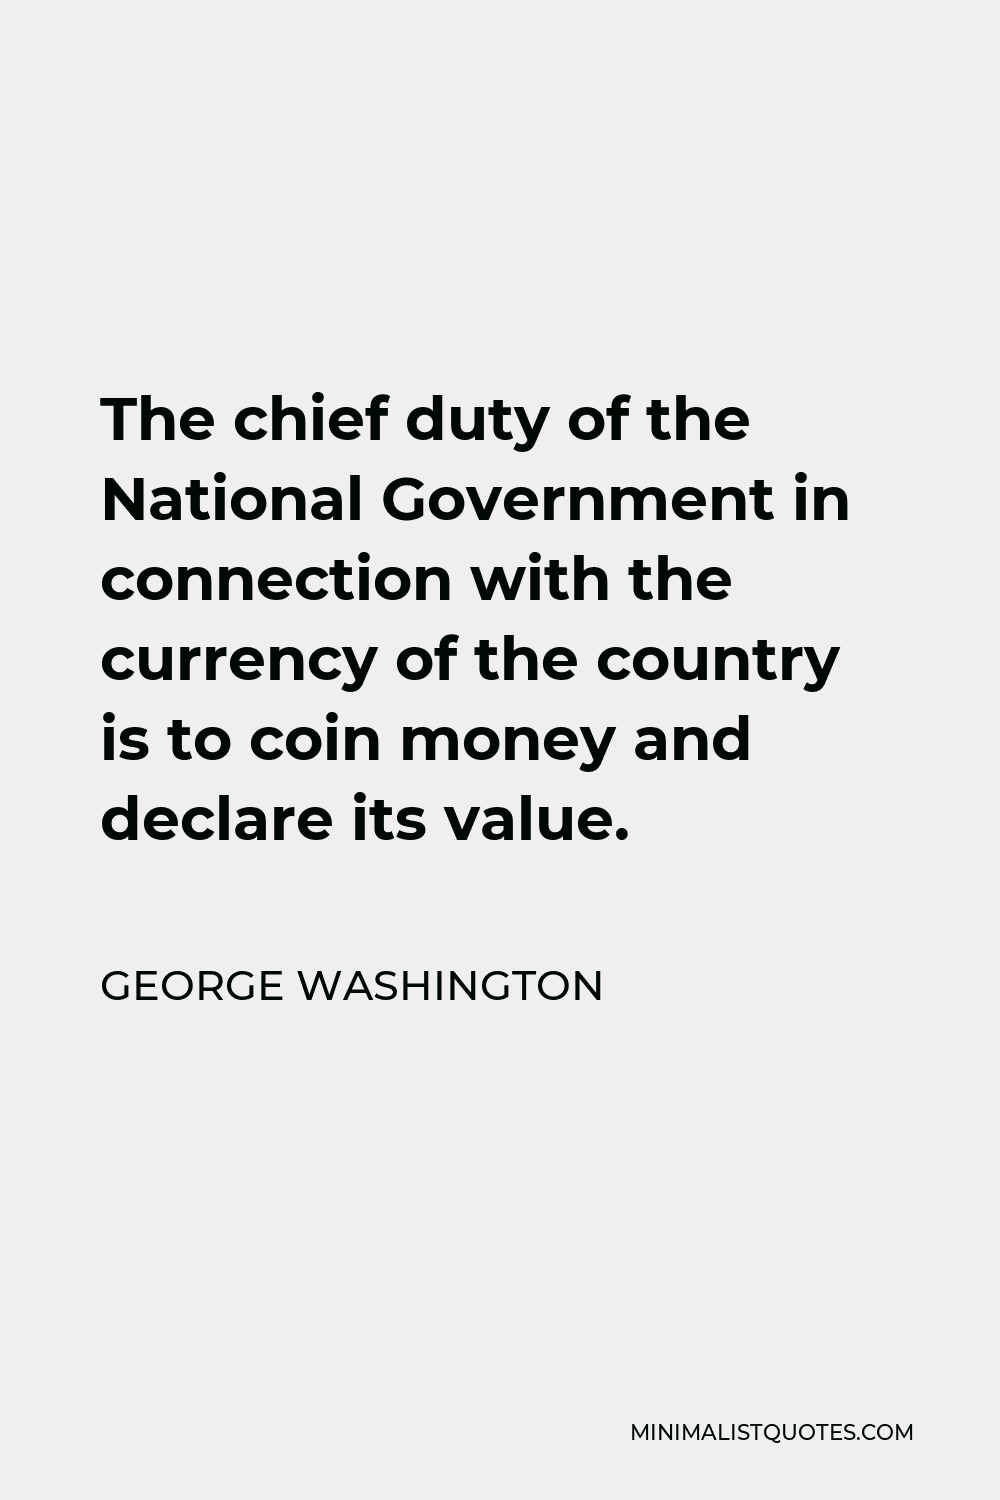 George Washington Quote - The chief duty of the National Government in connection with the currency of the country is to coin money and declare its value.